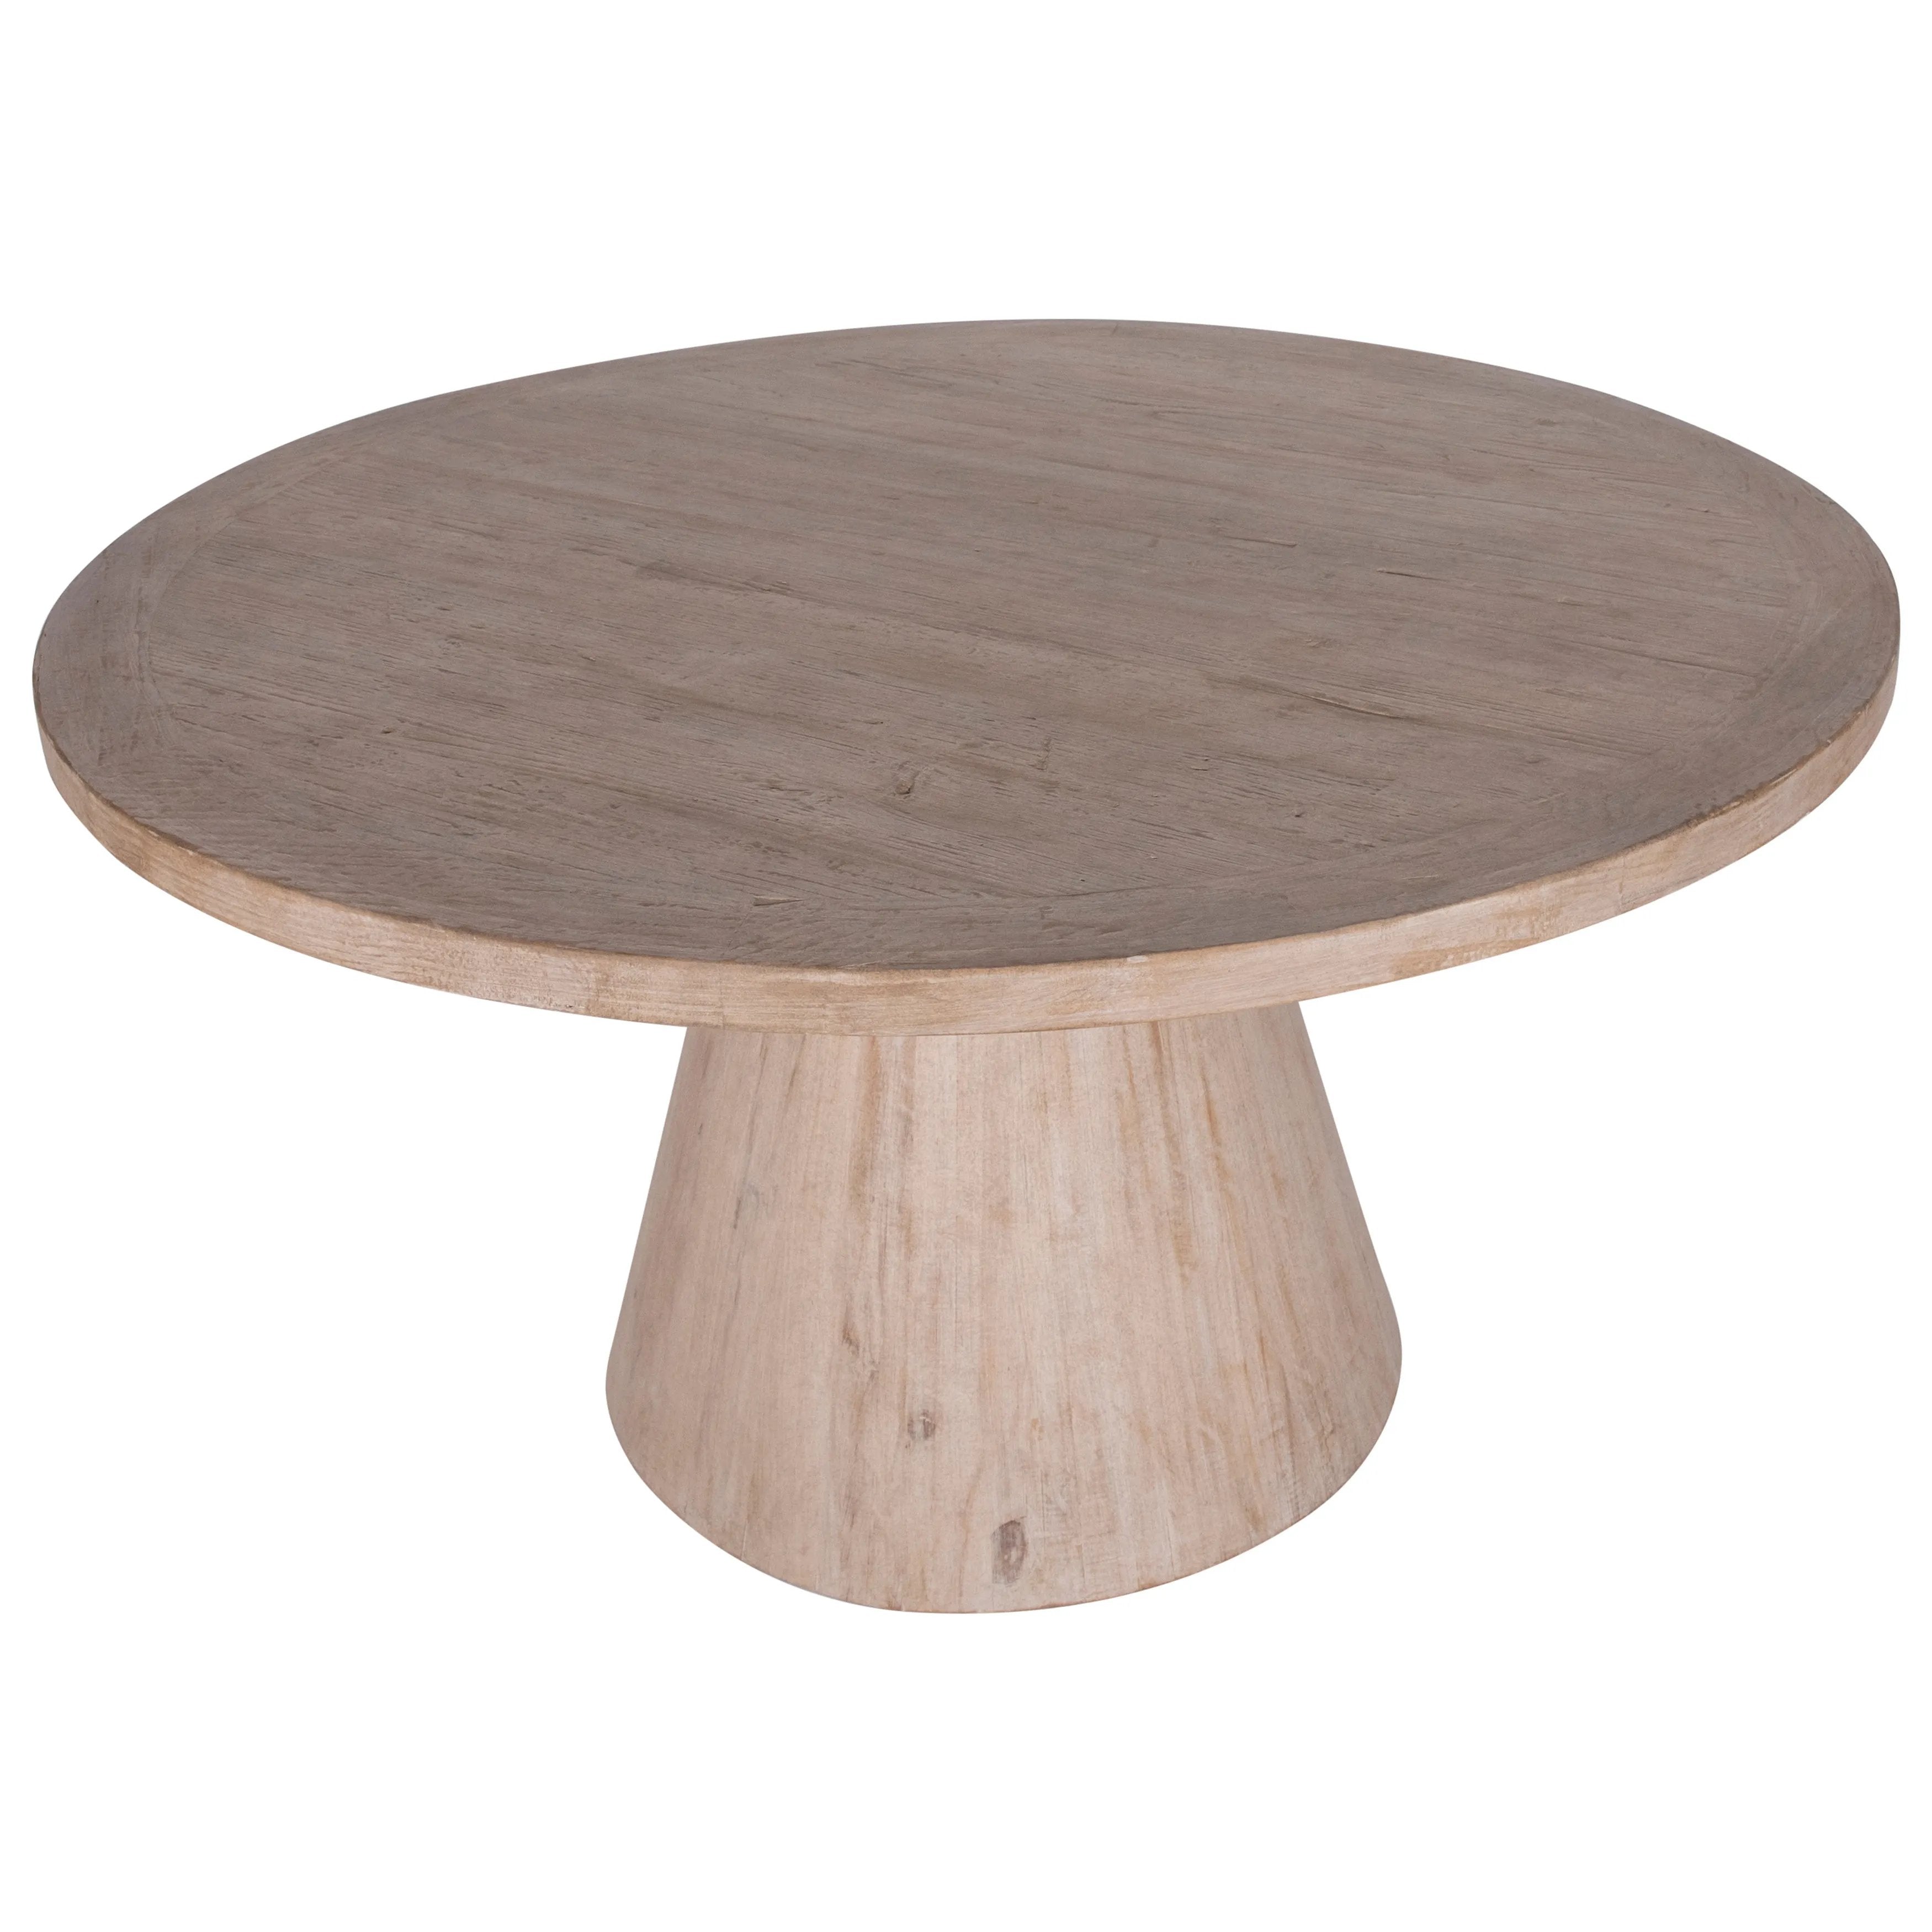 Crafted from reclaimed pine wood, featuring a round shape on a sturdy cone-shaped base that lends to a unique modern silhouette. This 55” round dining table features a light warm wash finish that works great for any style or décor, creating the perfect stage for an enjoyable dinner gathering. Amethyst Home provides interior design, new home construction design consulting, vintage area rugs, and lighting in the Winter Garden metro area.